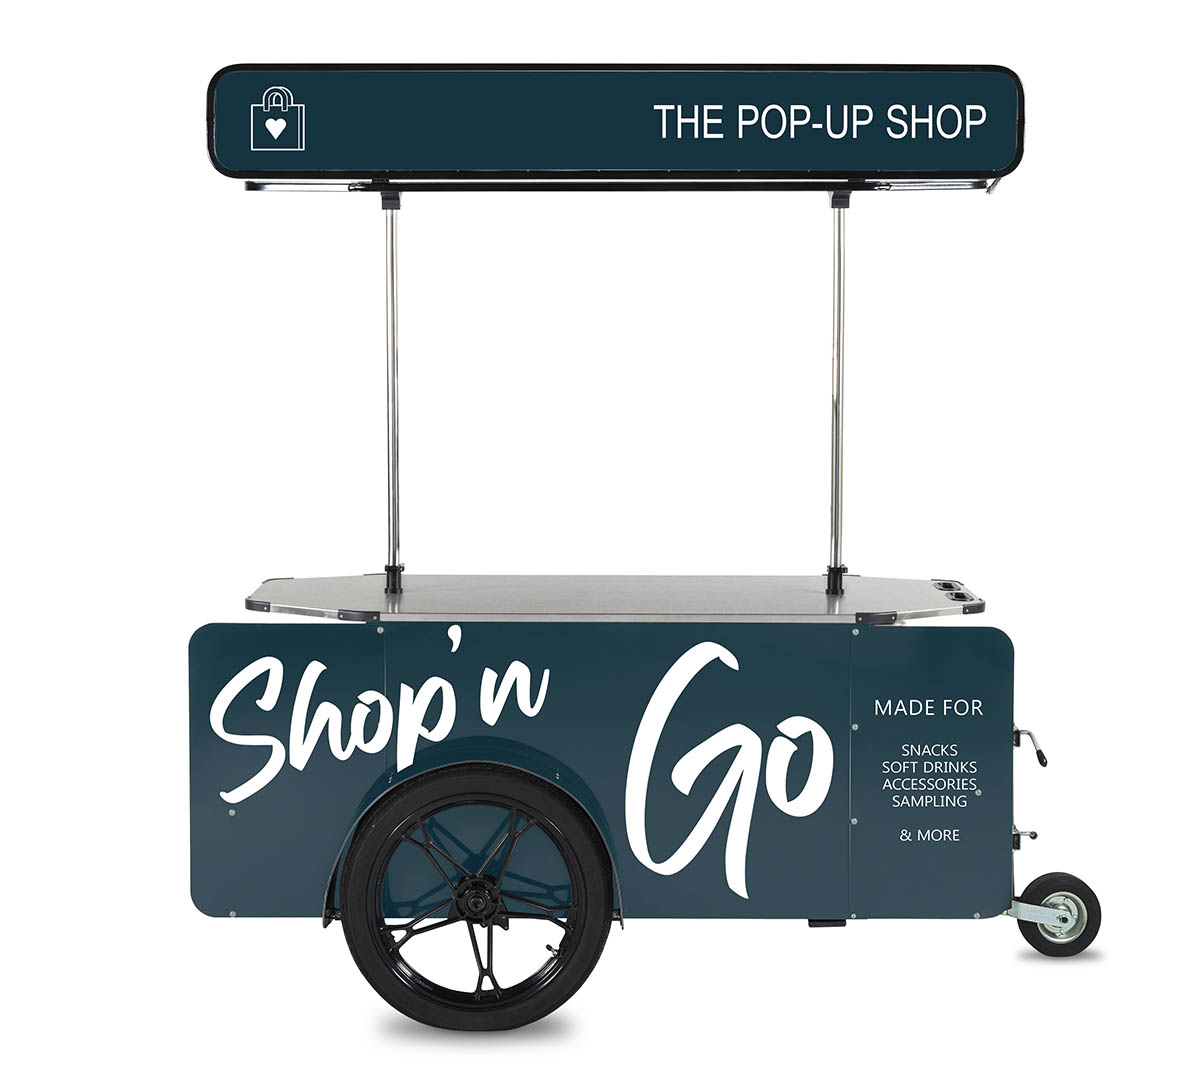 Vendor cart for street vending customized with decals